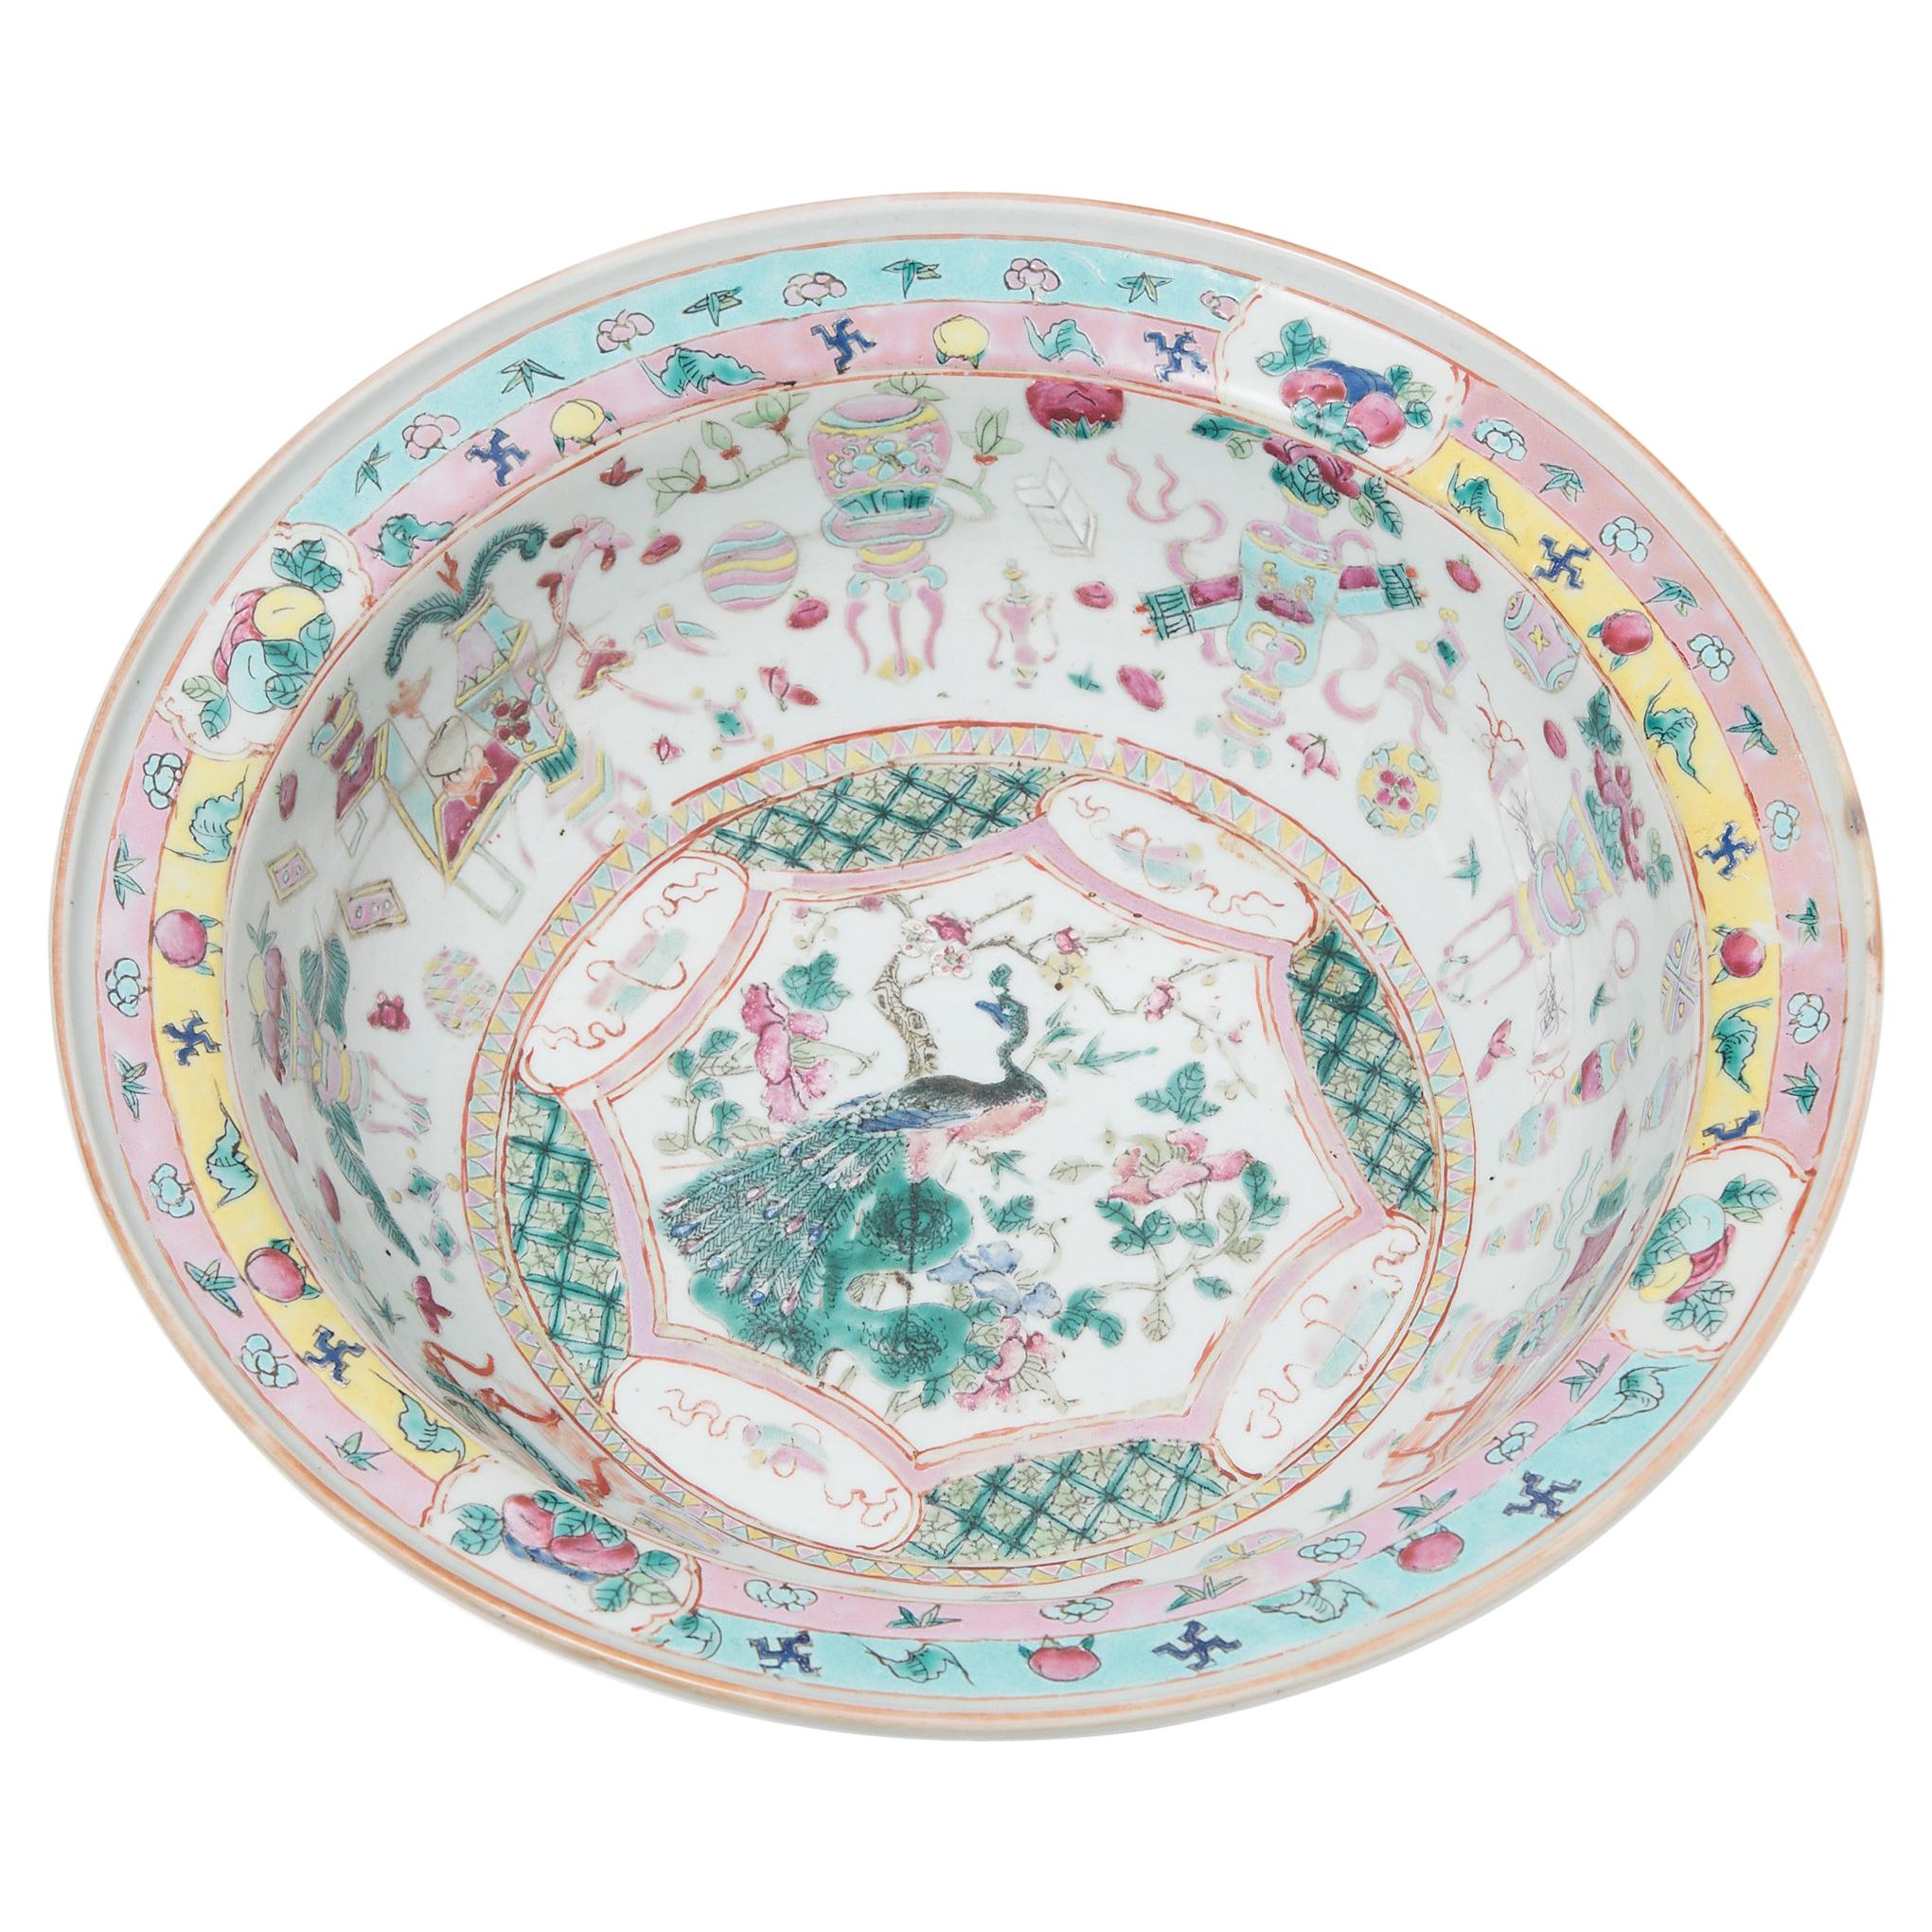 Chinese Famille Rose Bowl with Scholars' Objects, c. 1850